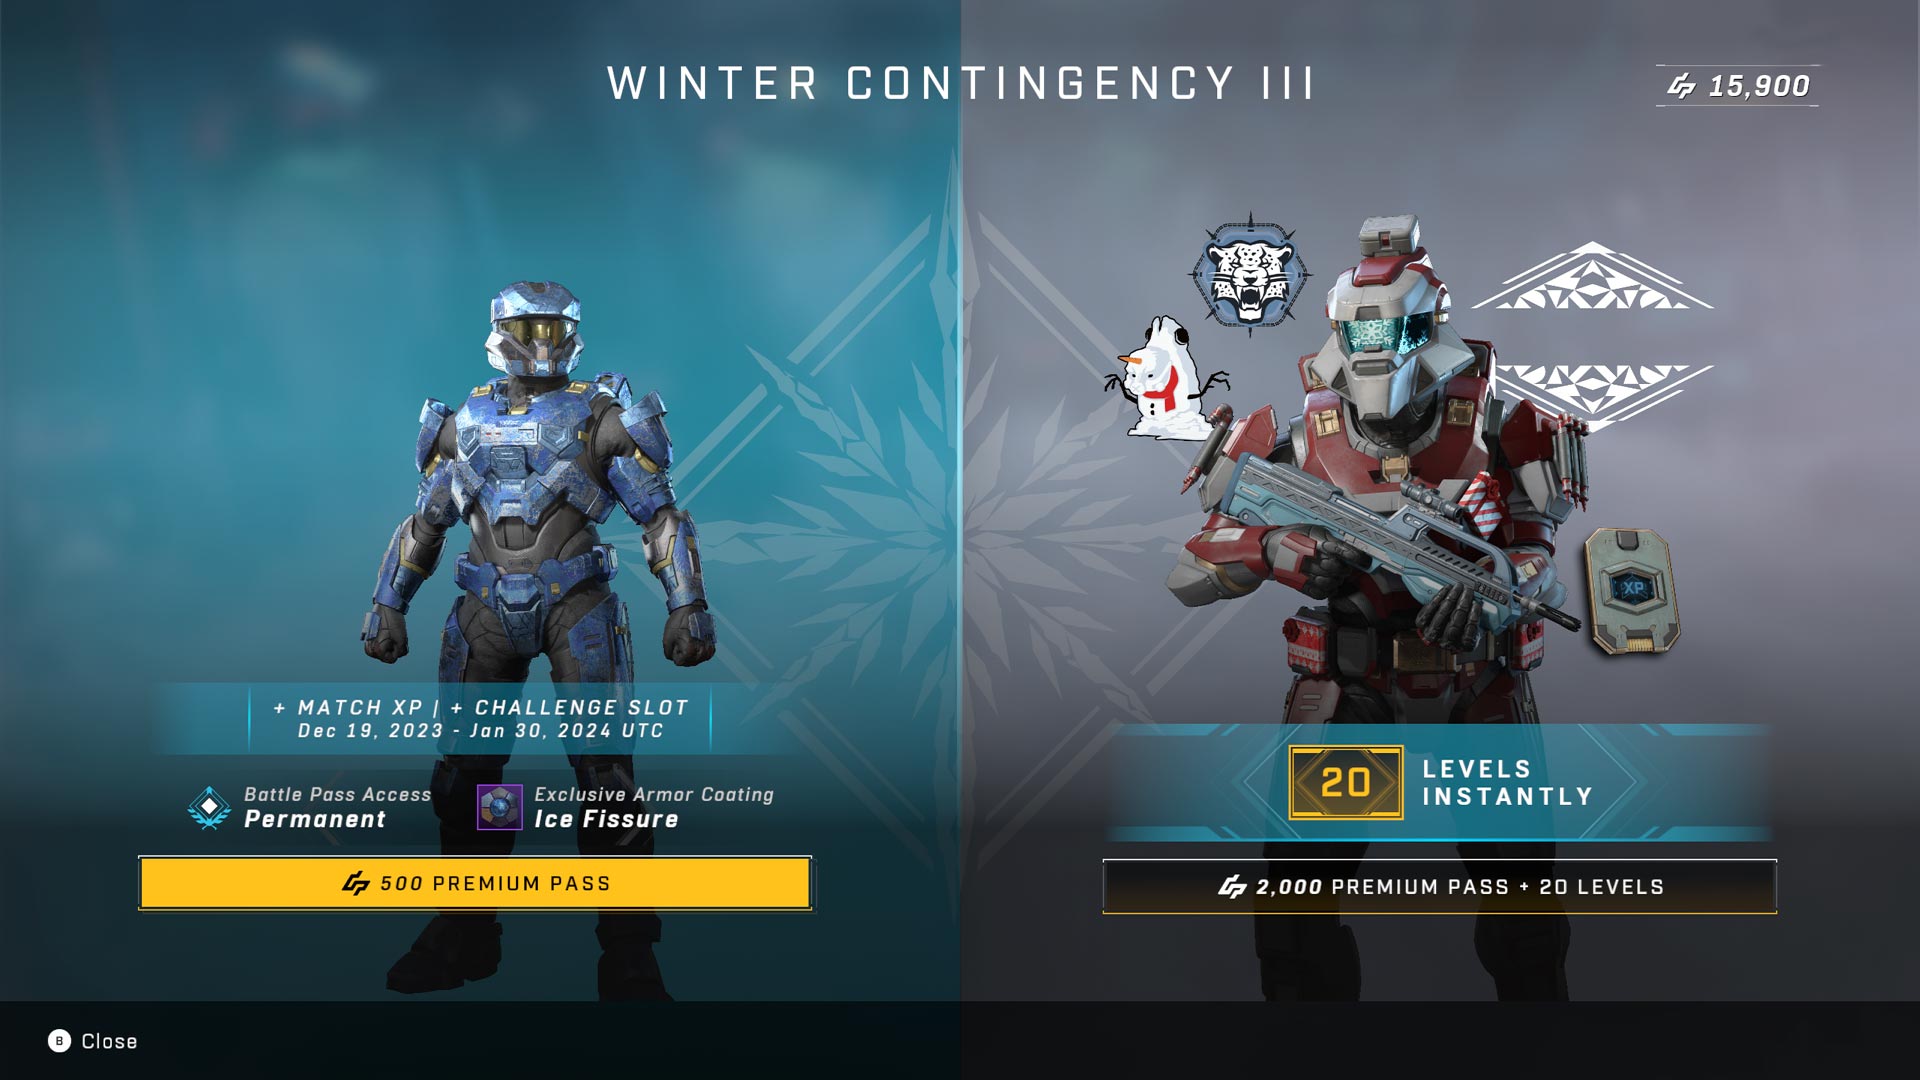 Halo Infinite image of the switcher showing the 500 credit premium pass (featuring the exclusive Ice Fissure armor coating and the 2000 credit premium pass